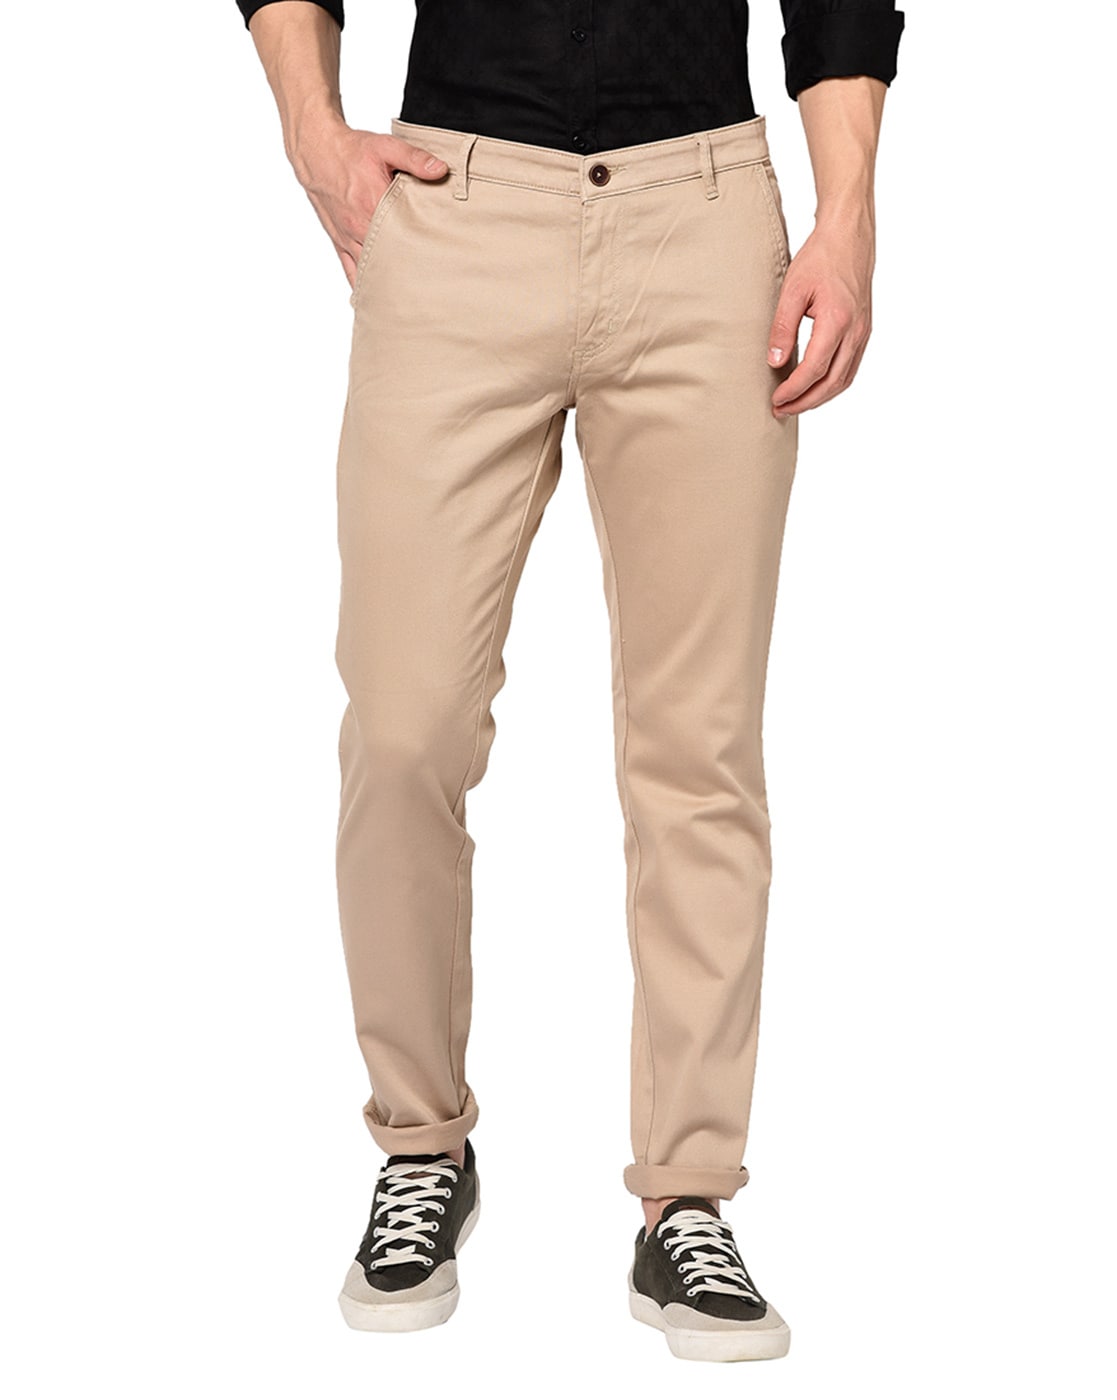 Buy TNG Men's Cotton Blue Solid Formal Trousers at Amazon.in